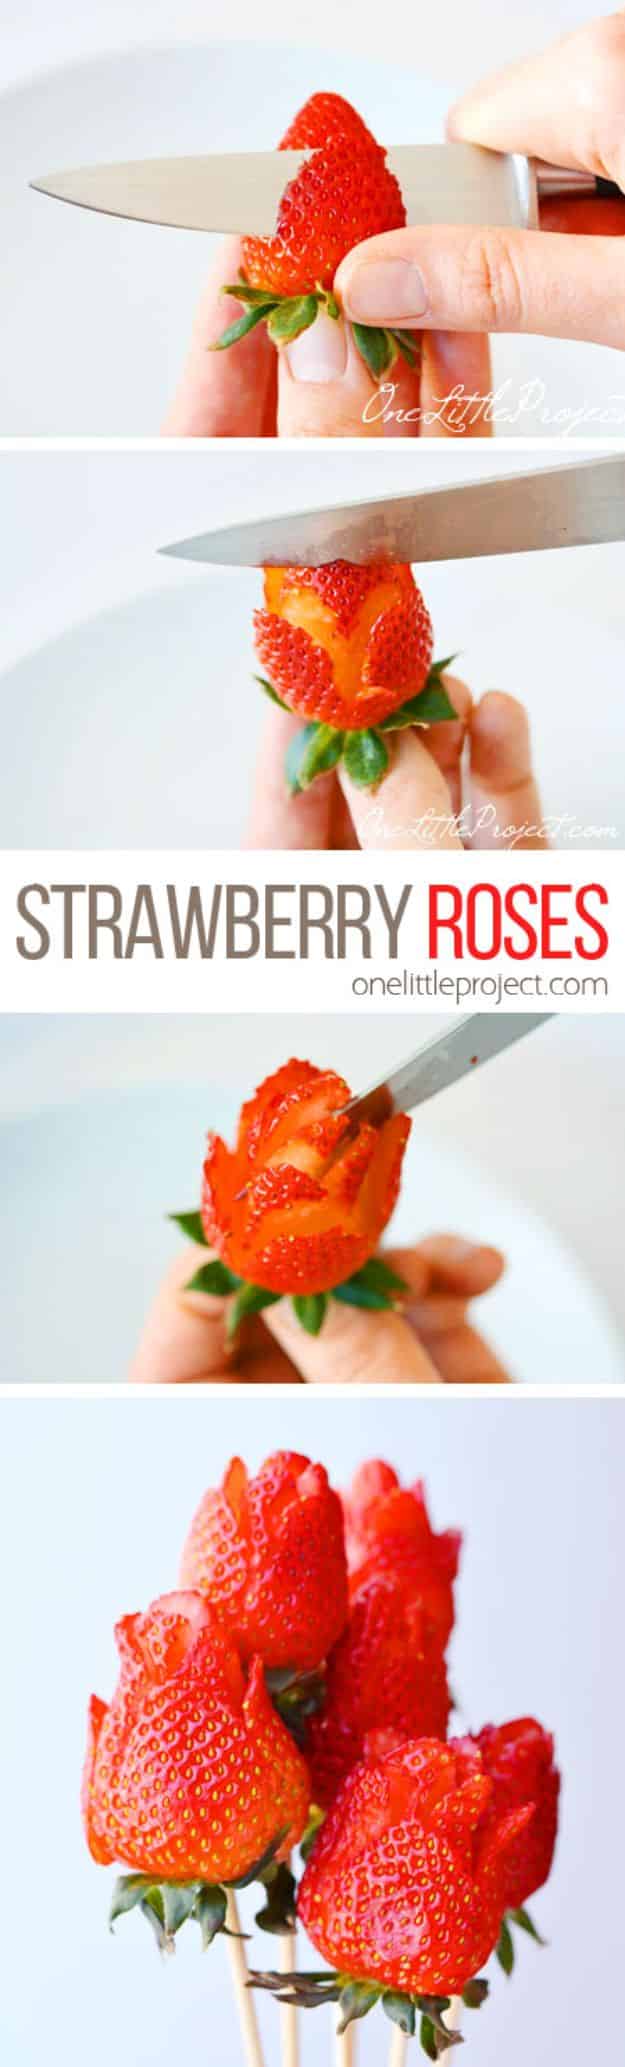 Best Mothers Day Ideas - Strawberry Rose - Easy and Cute DIY Projects to Make for Mom - Cool Gifts and Homemade Cards, Gift in A Jar Ideas - Cheap Things You Can Make for Your Mother http://diyjoy.com/diy-mothers-day-ideas